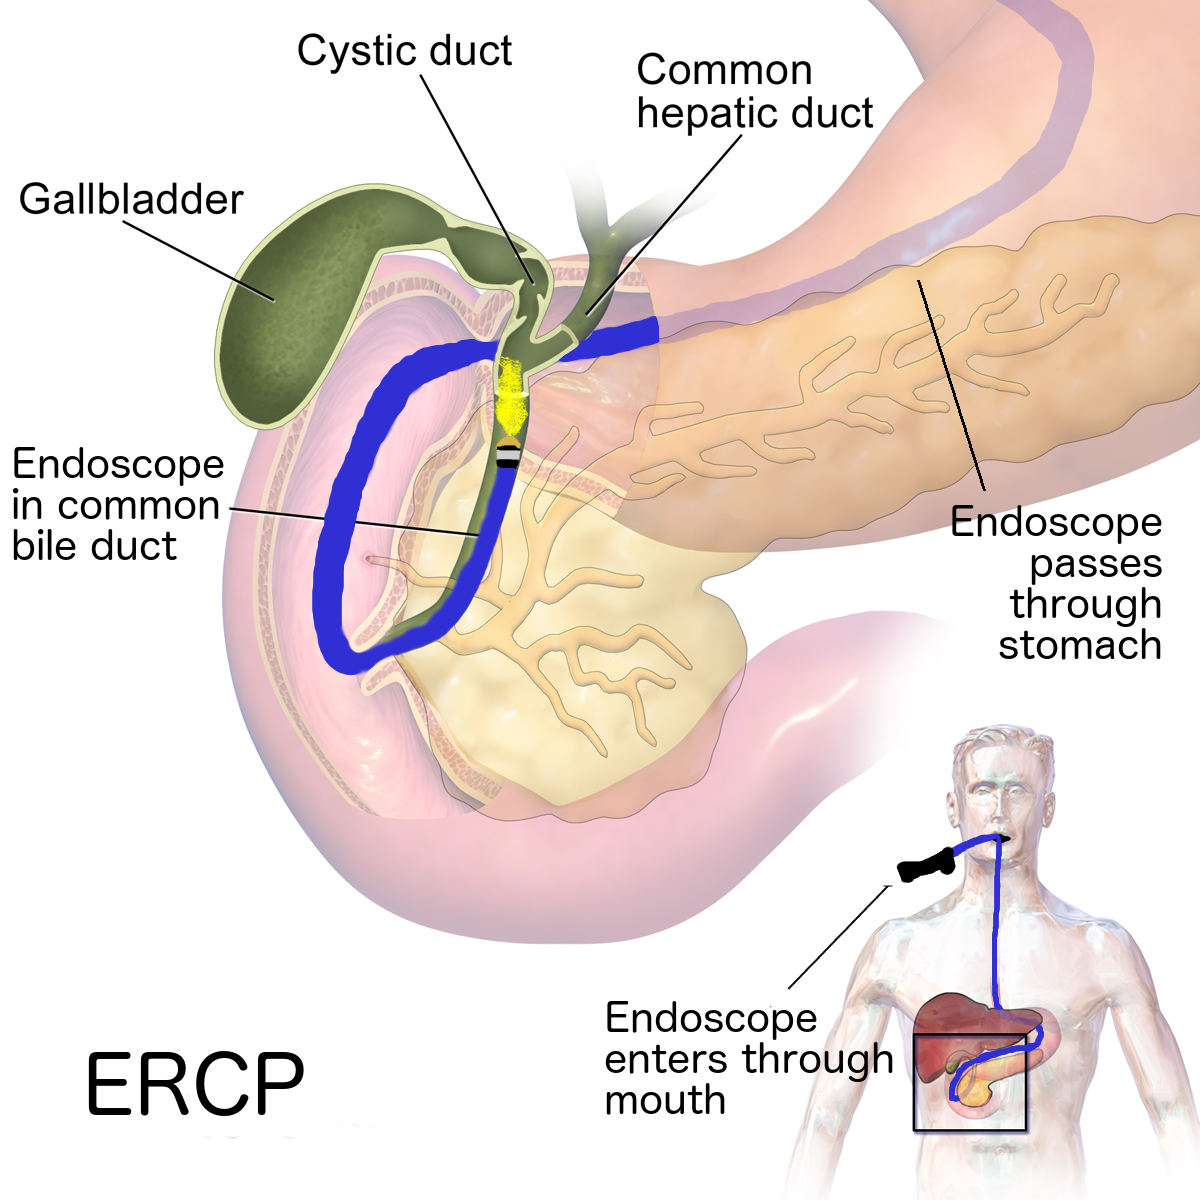 Endoscopic Retrograde Cholangiopancreatography (ERCP)- A test for digestive diseases